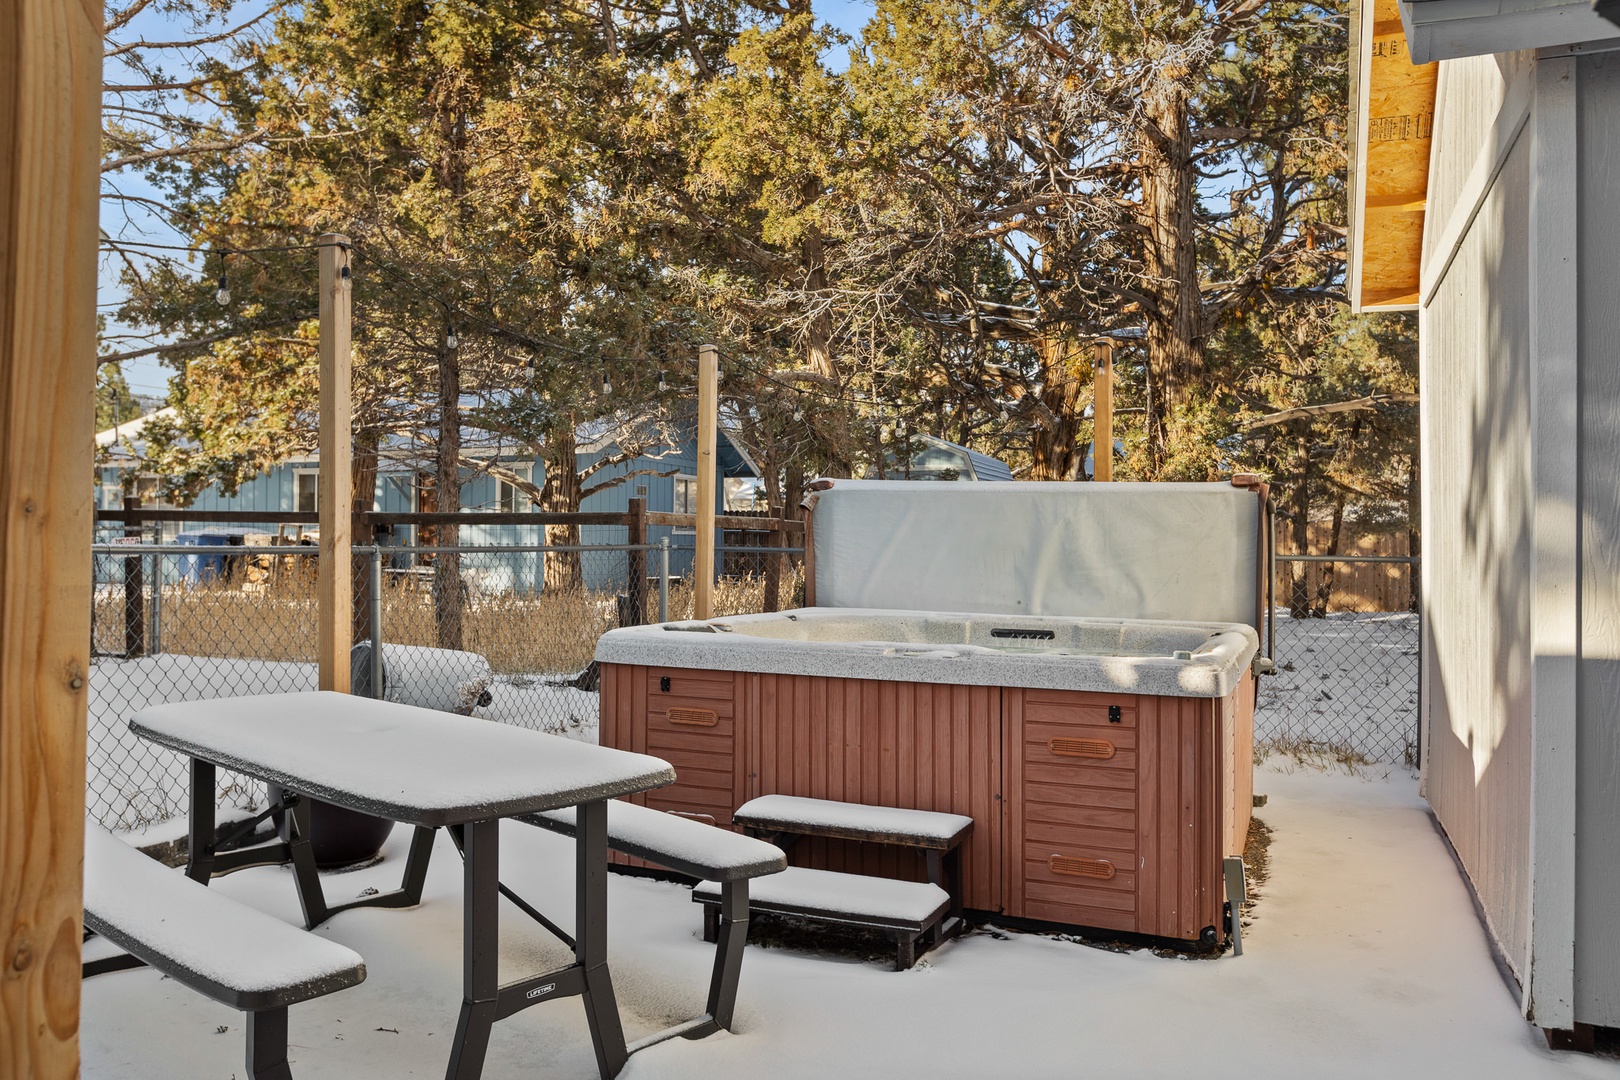 Hot Tub with outdoor seating